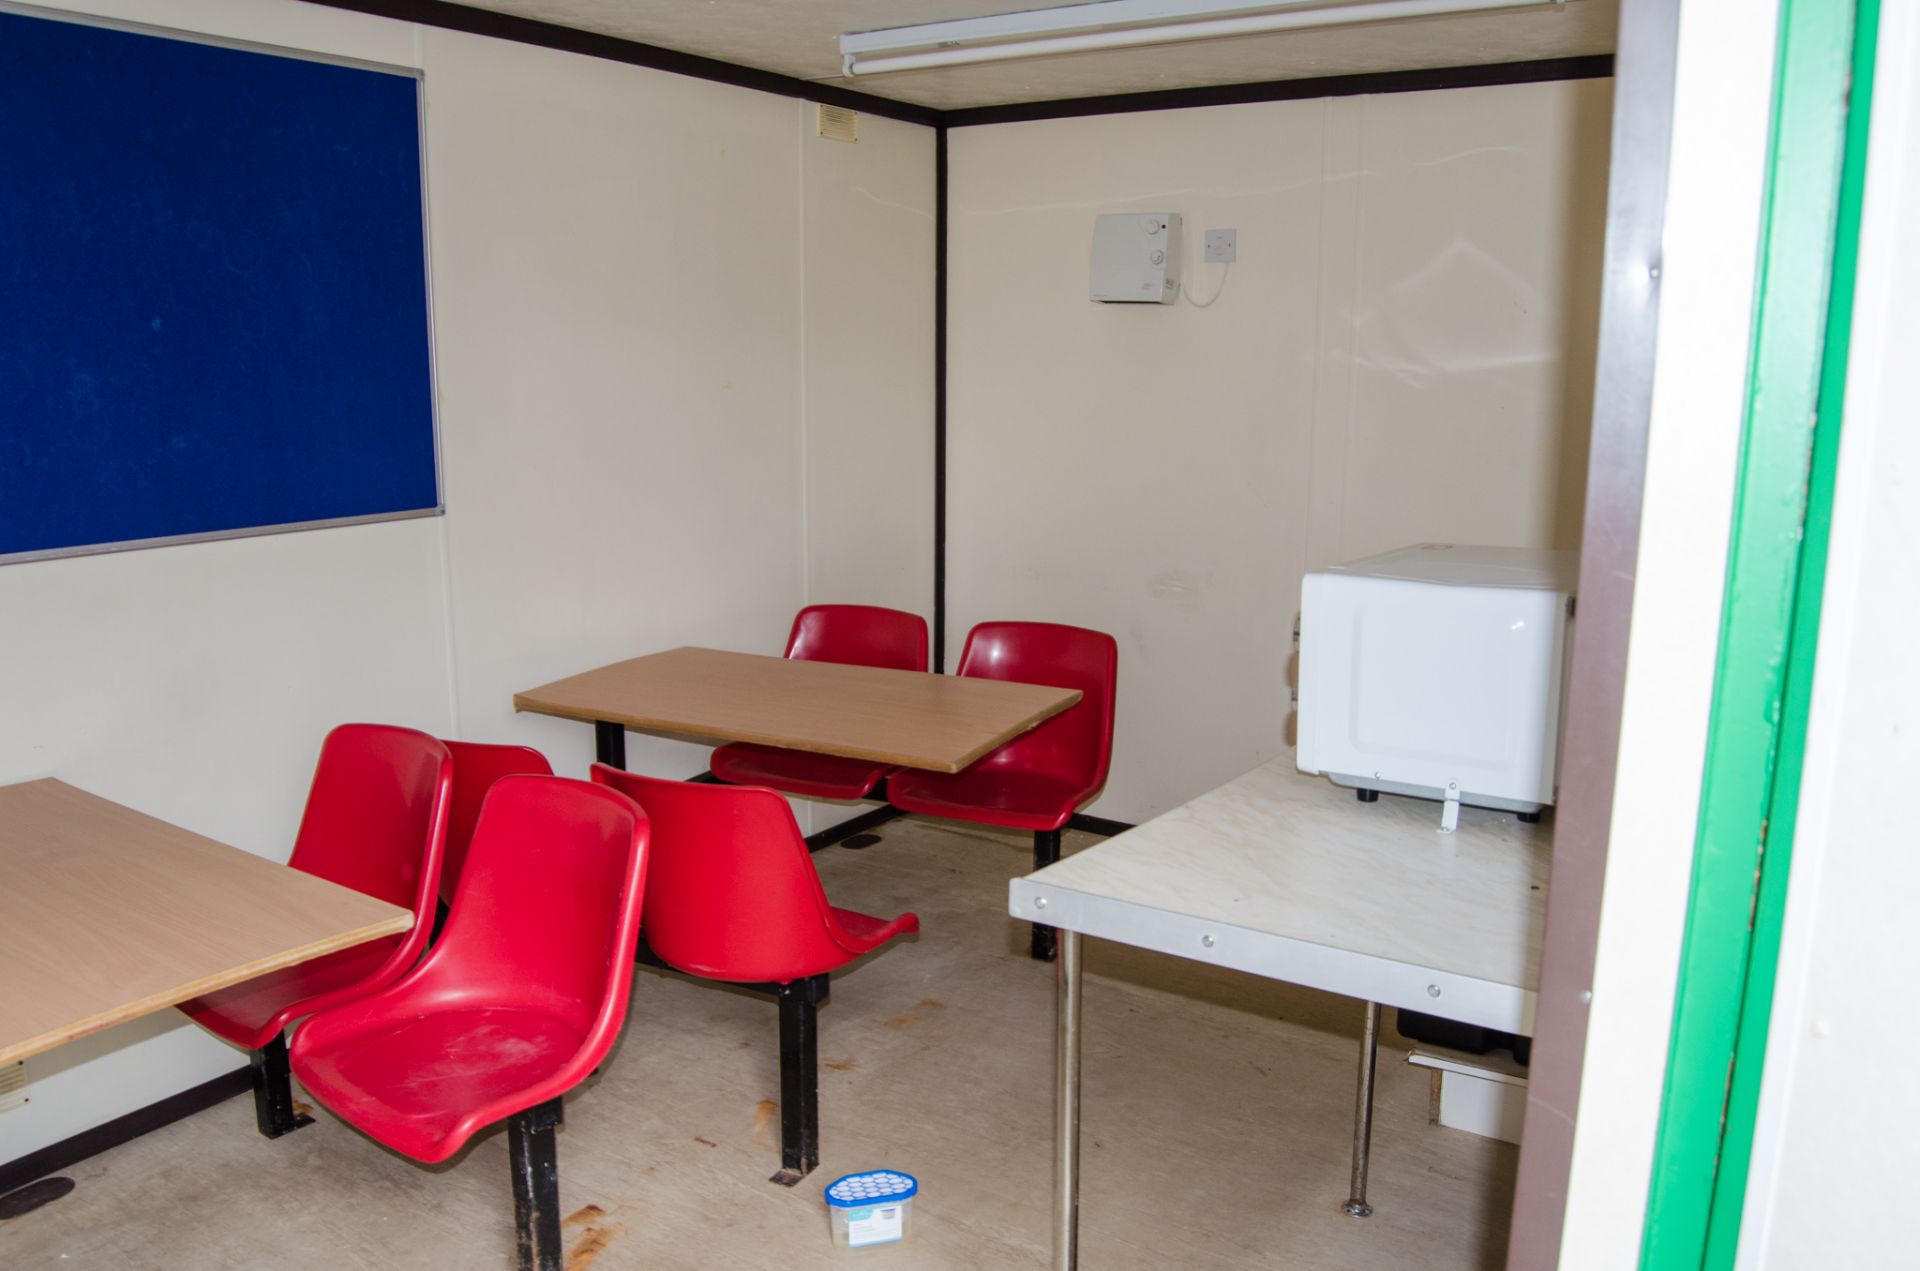 21ft x 9 ft steel anti-vandal welfare site unit Comprising of: canteen area, toilet & generator room - Image 5 of 9